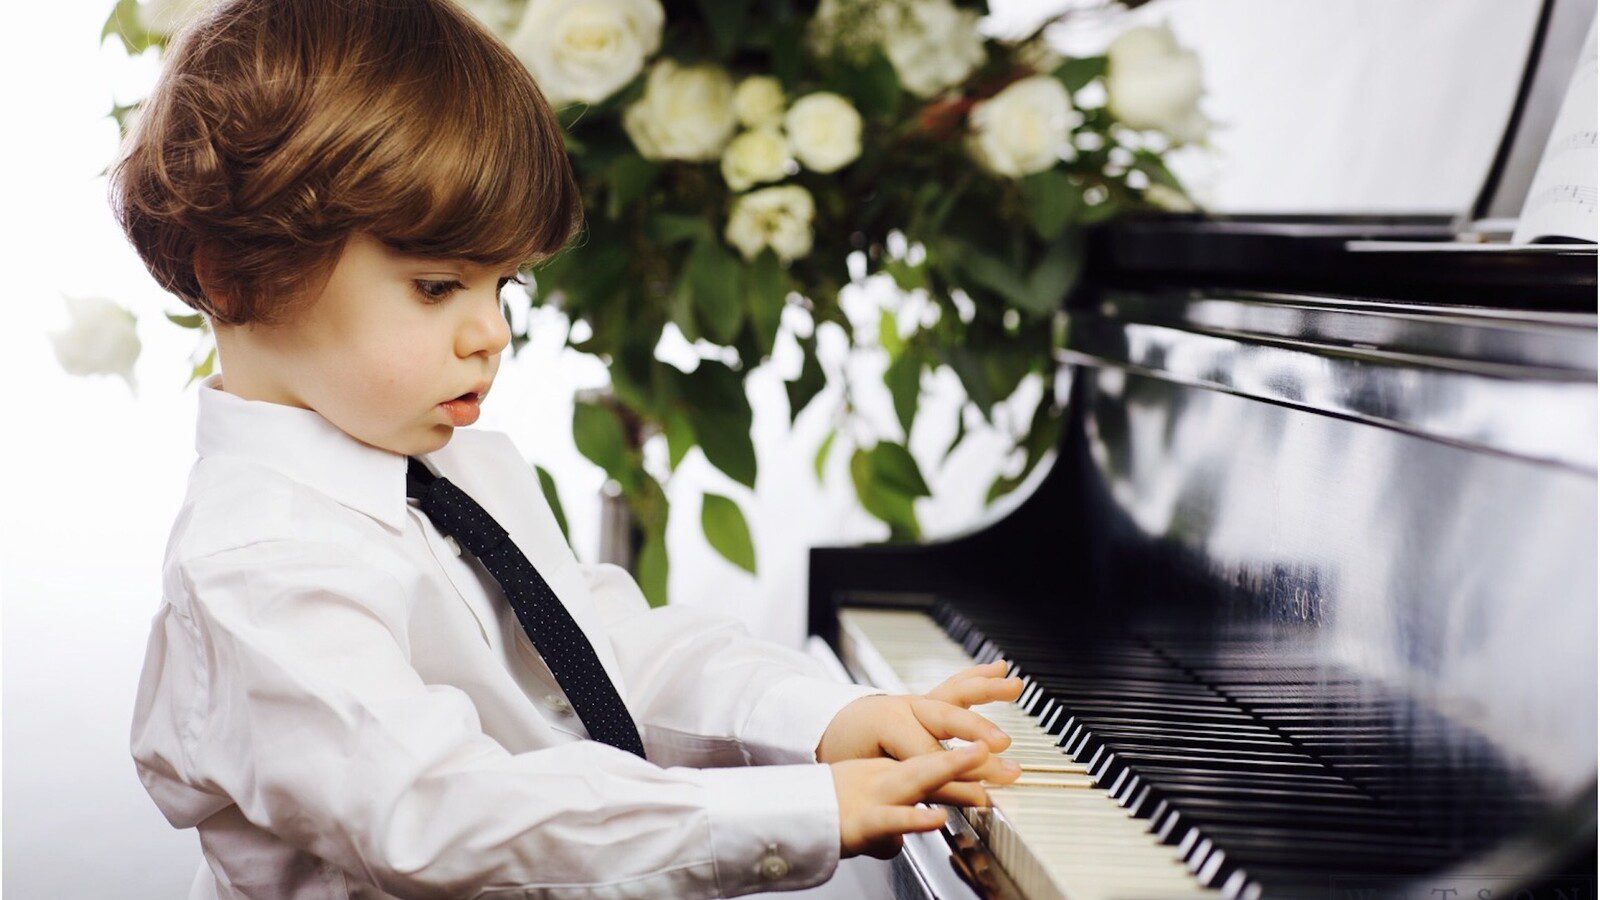 Autumn Artist Interactive - Boy playing the piano.